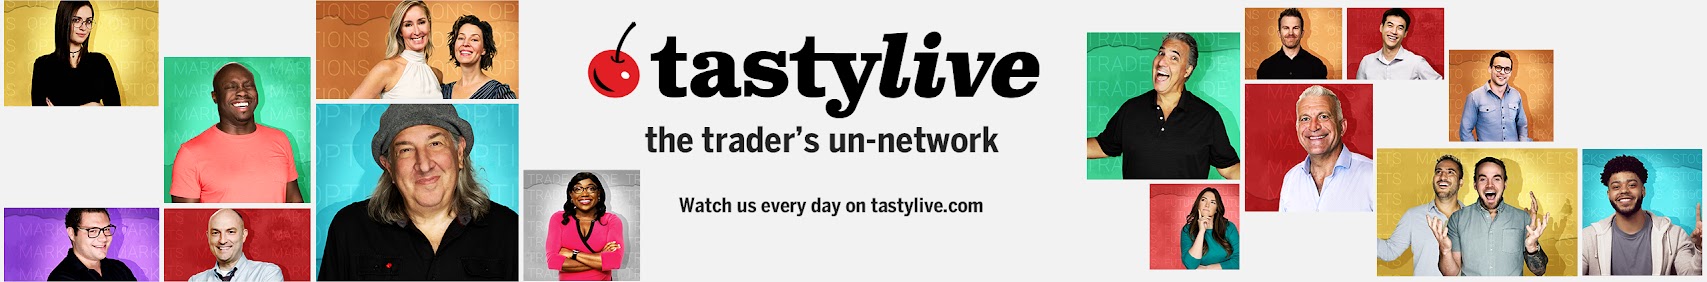 tastylive youtube channel banner